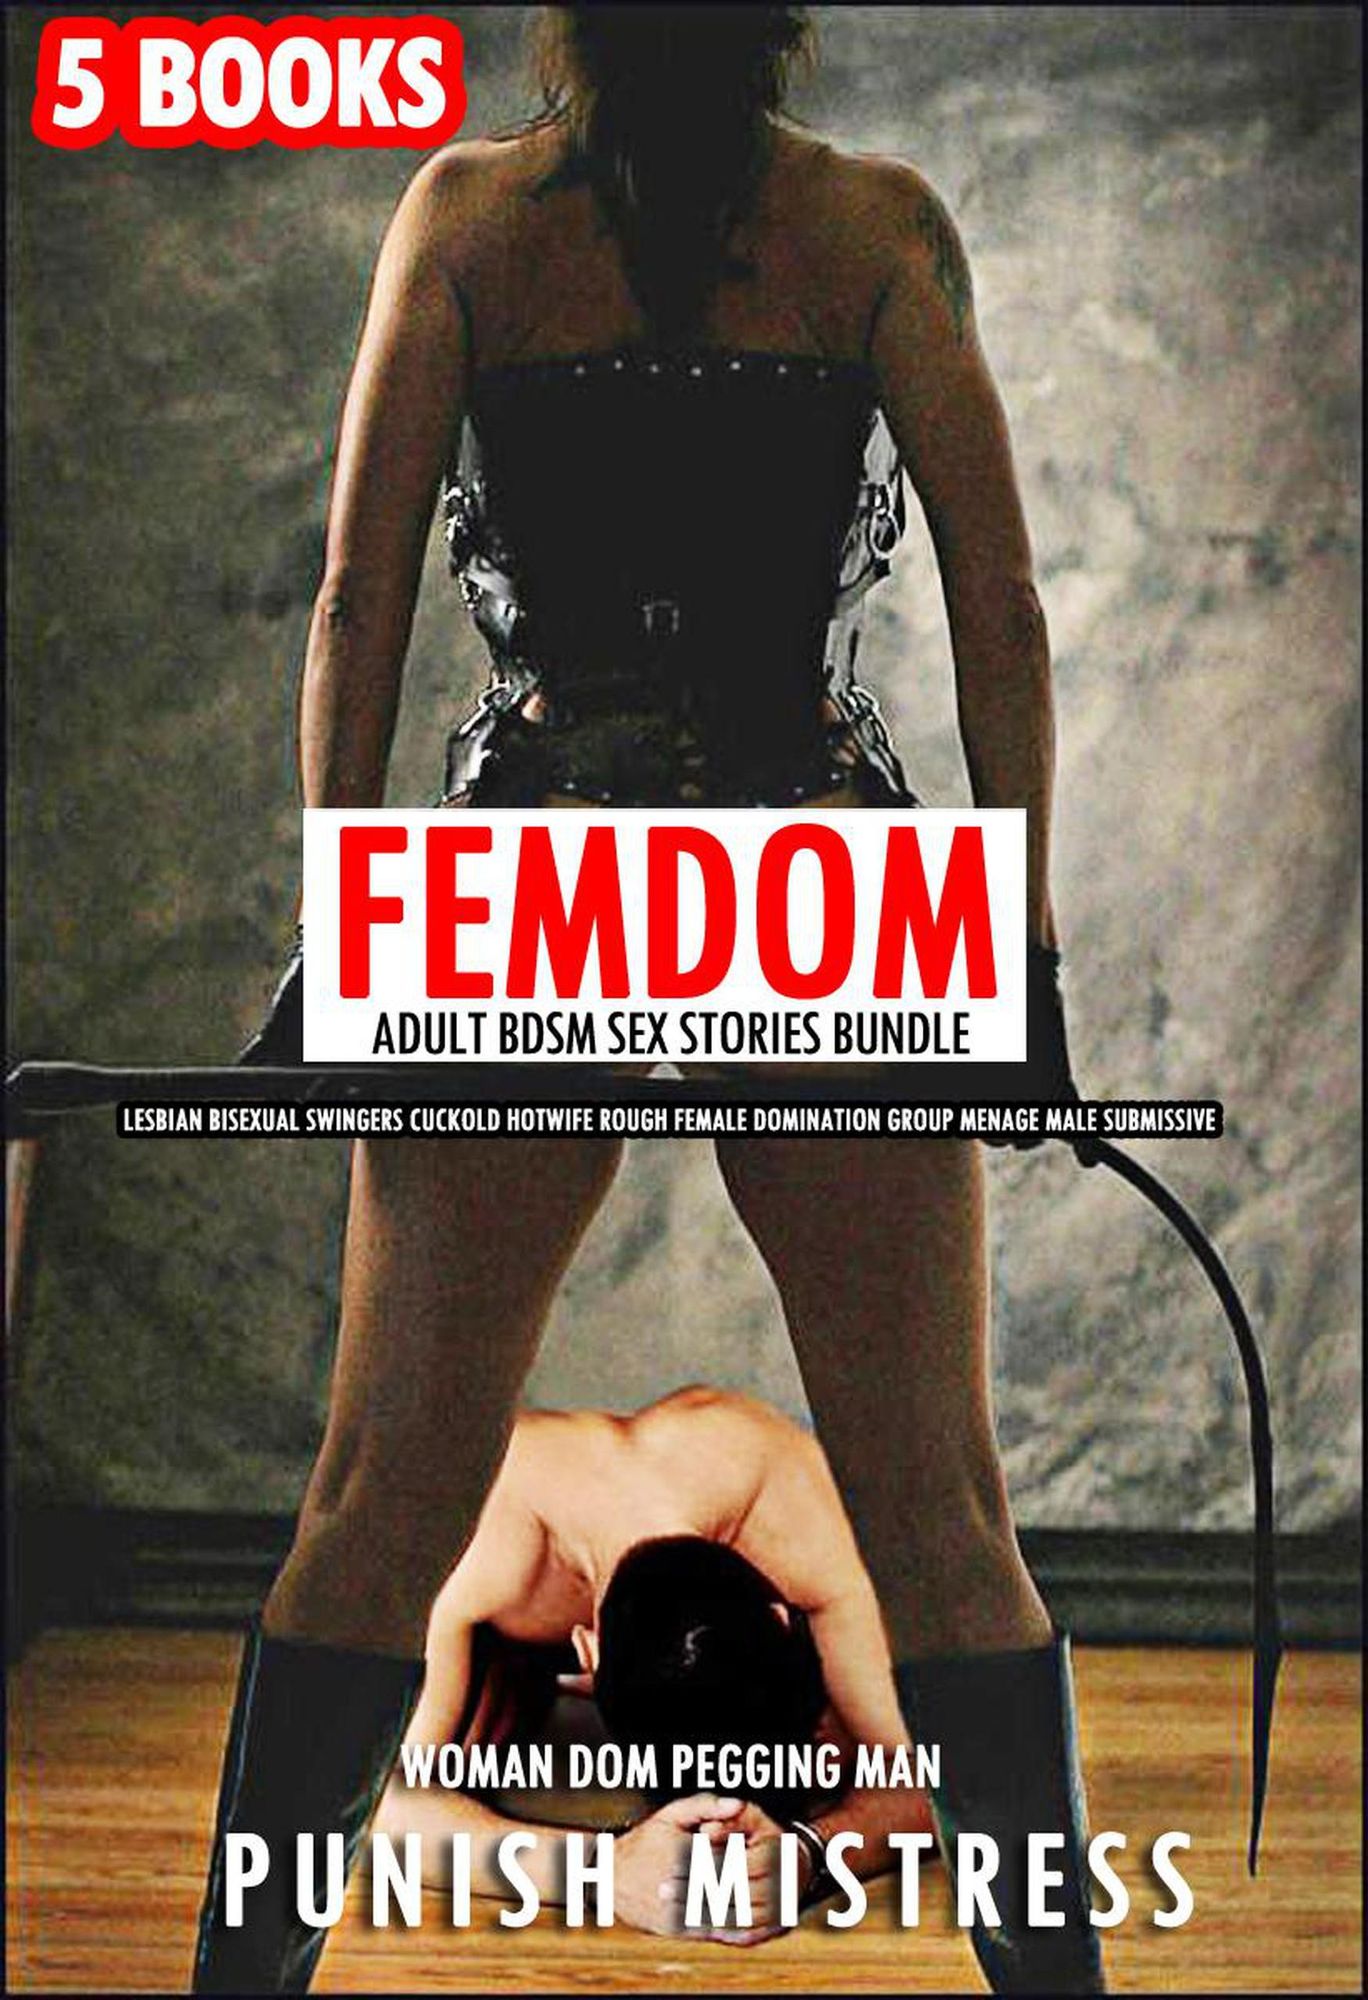 5 Books Femdom Adult BDSM Sex Stories Bundle - Lesbian Bisexual Swingers Cuckold Hotwife Rough Female Domination Group Menage Male Submissive (Woman D von Punish Mistress pic picture